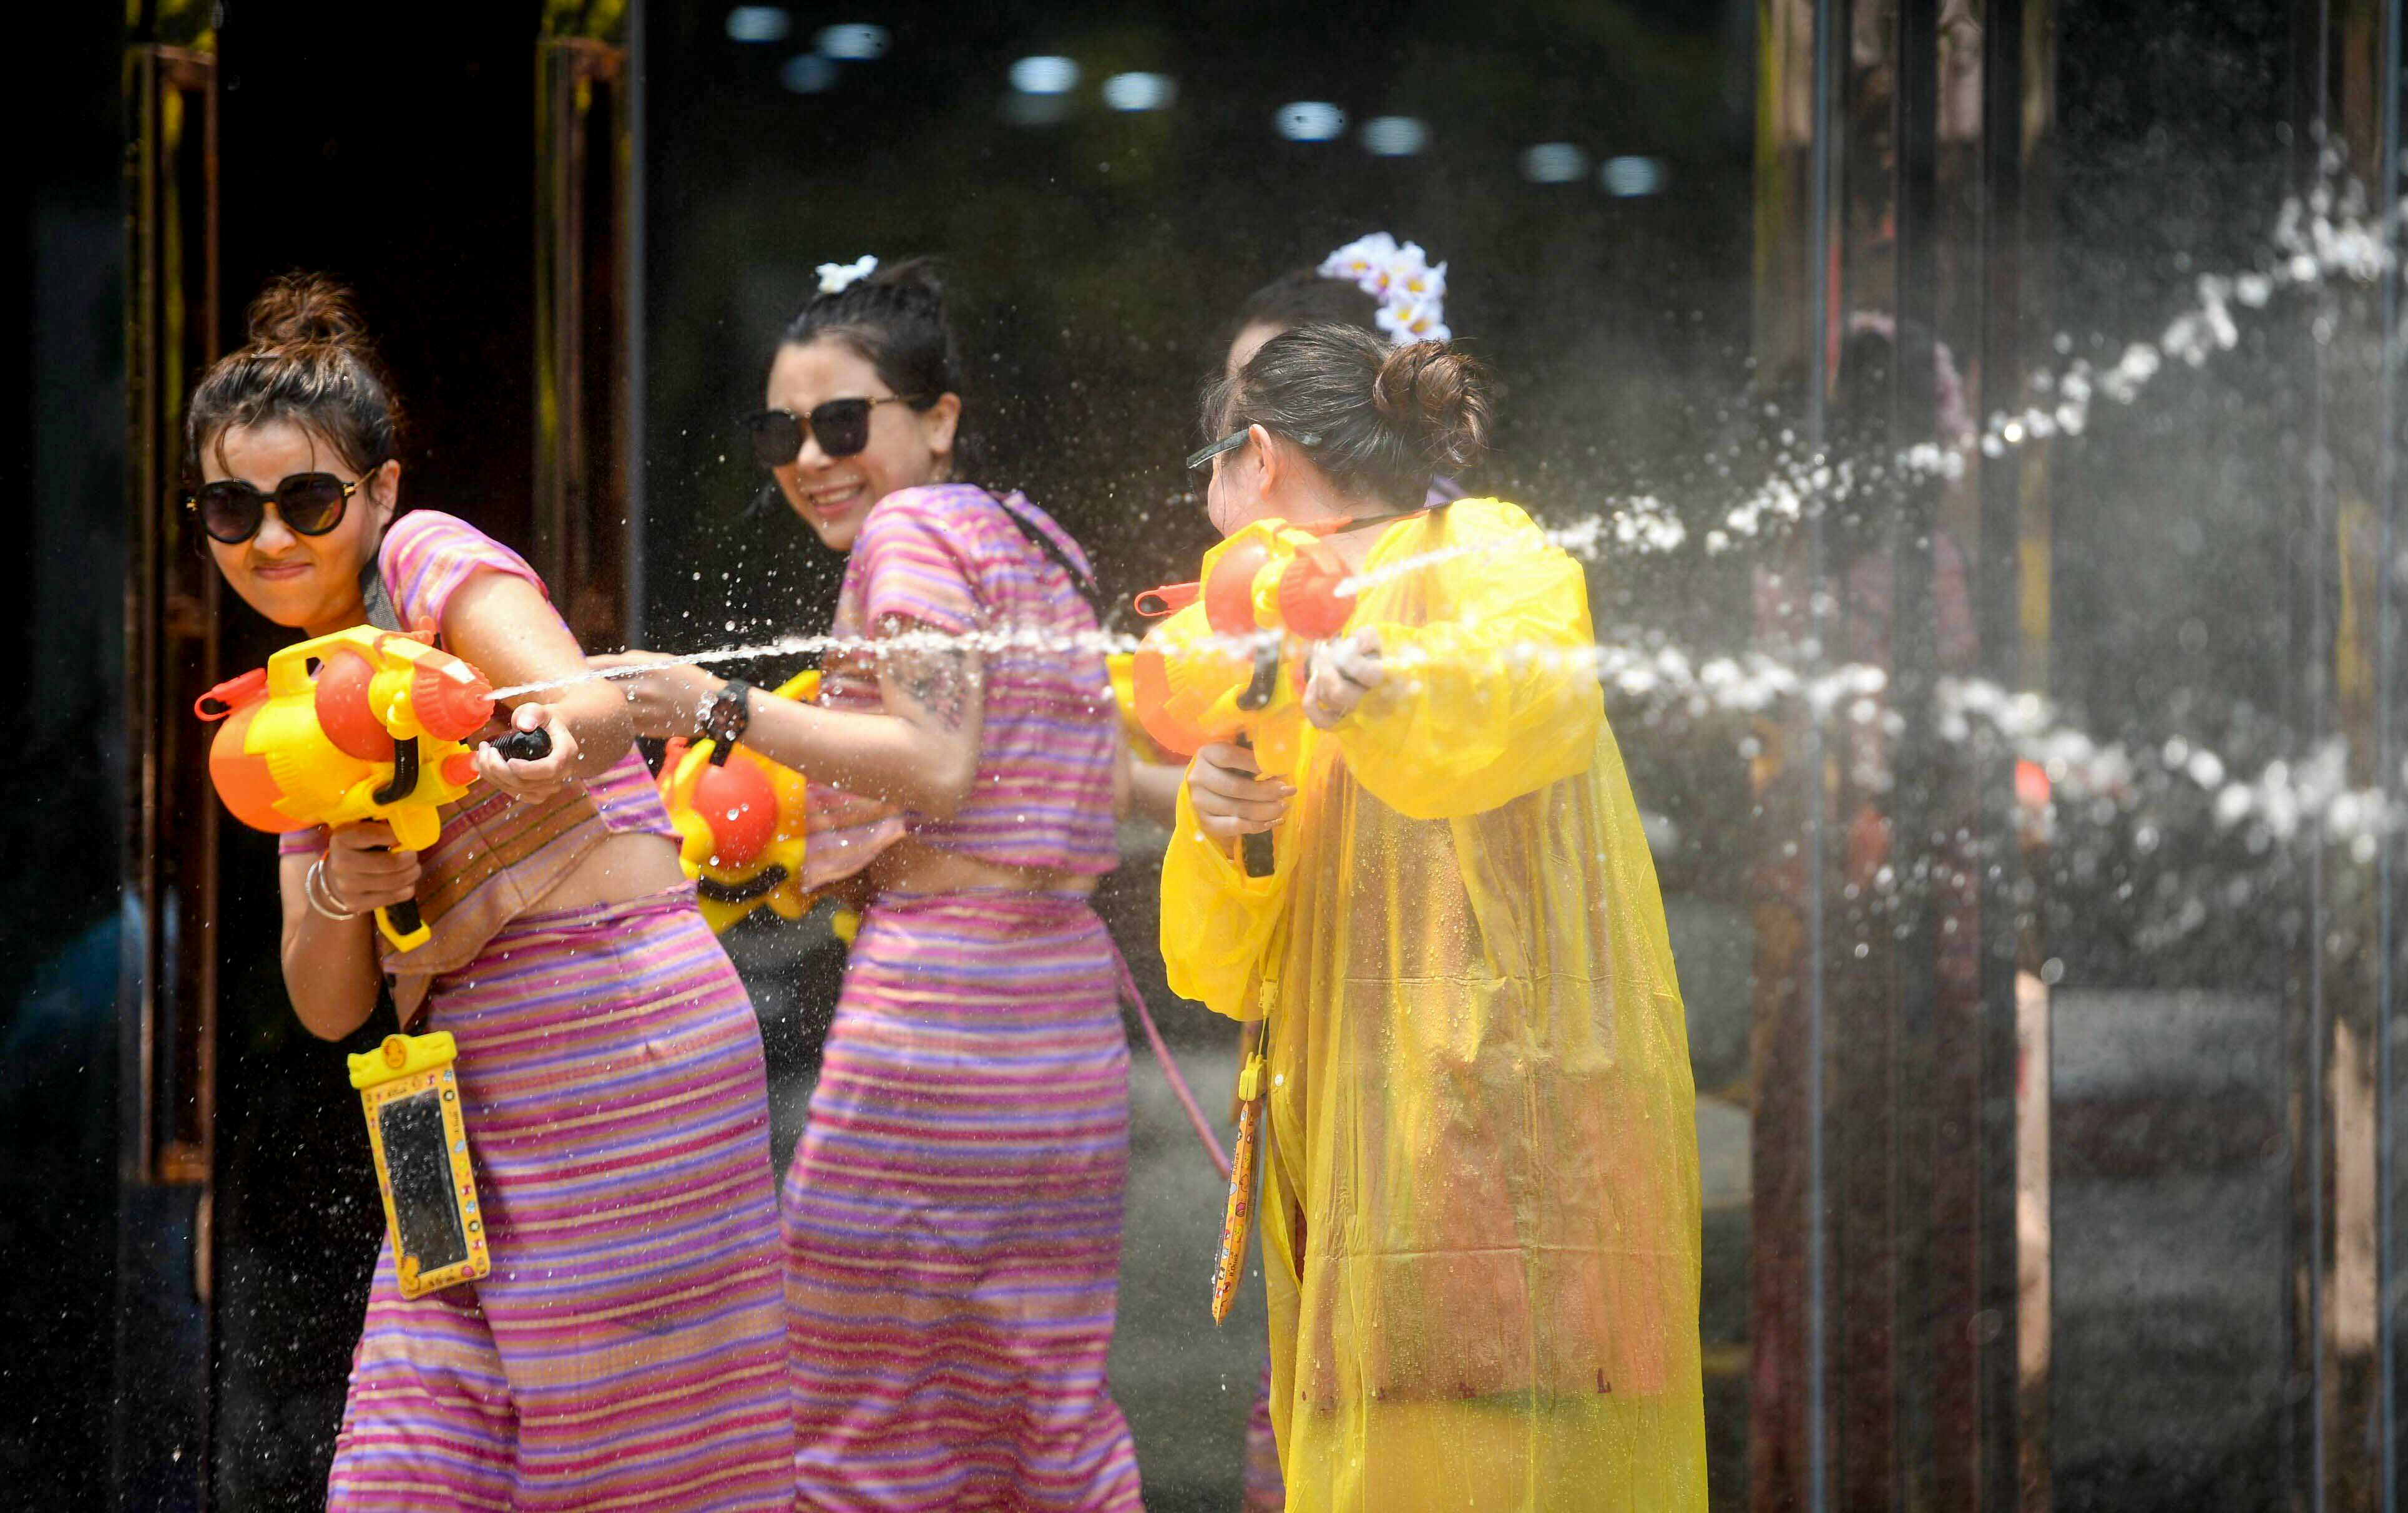 XISHUANGBANNA, April 15, 2019 -- People celebrate the water-sprinkling festival on a street in Jinghong City, Dai Autonomous Prefecture of Xishuangbanna, southwest China's Yunnan Province, April 15, 2019. People sprinkle water to each other to pray for good fortune during the traditional water-sprinkling festival, which is also the New Year festival of the Dai ethnic group. (Xinhua/qinqing via Getty Images)